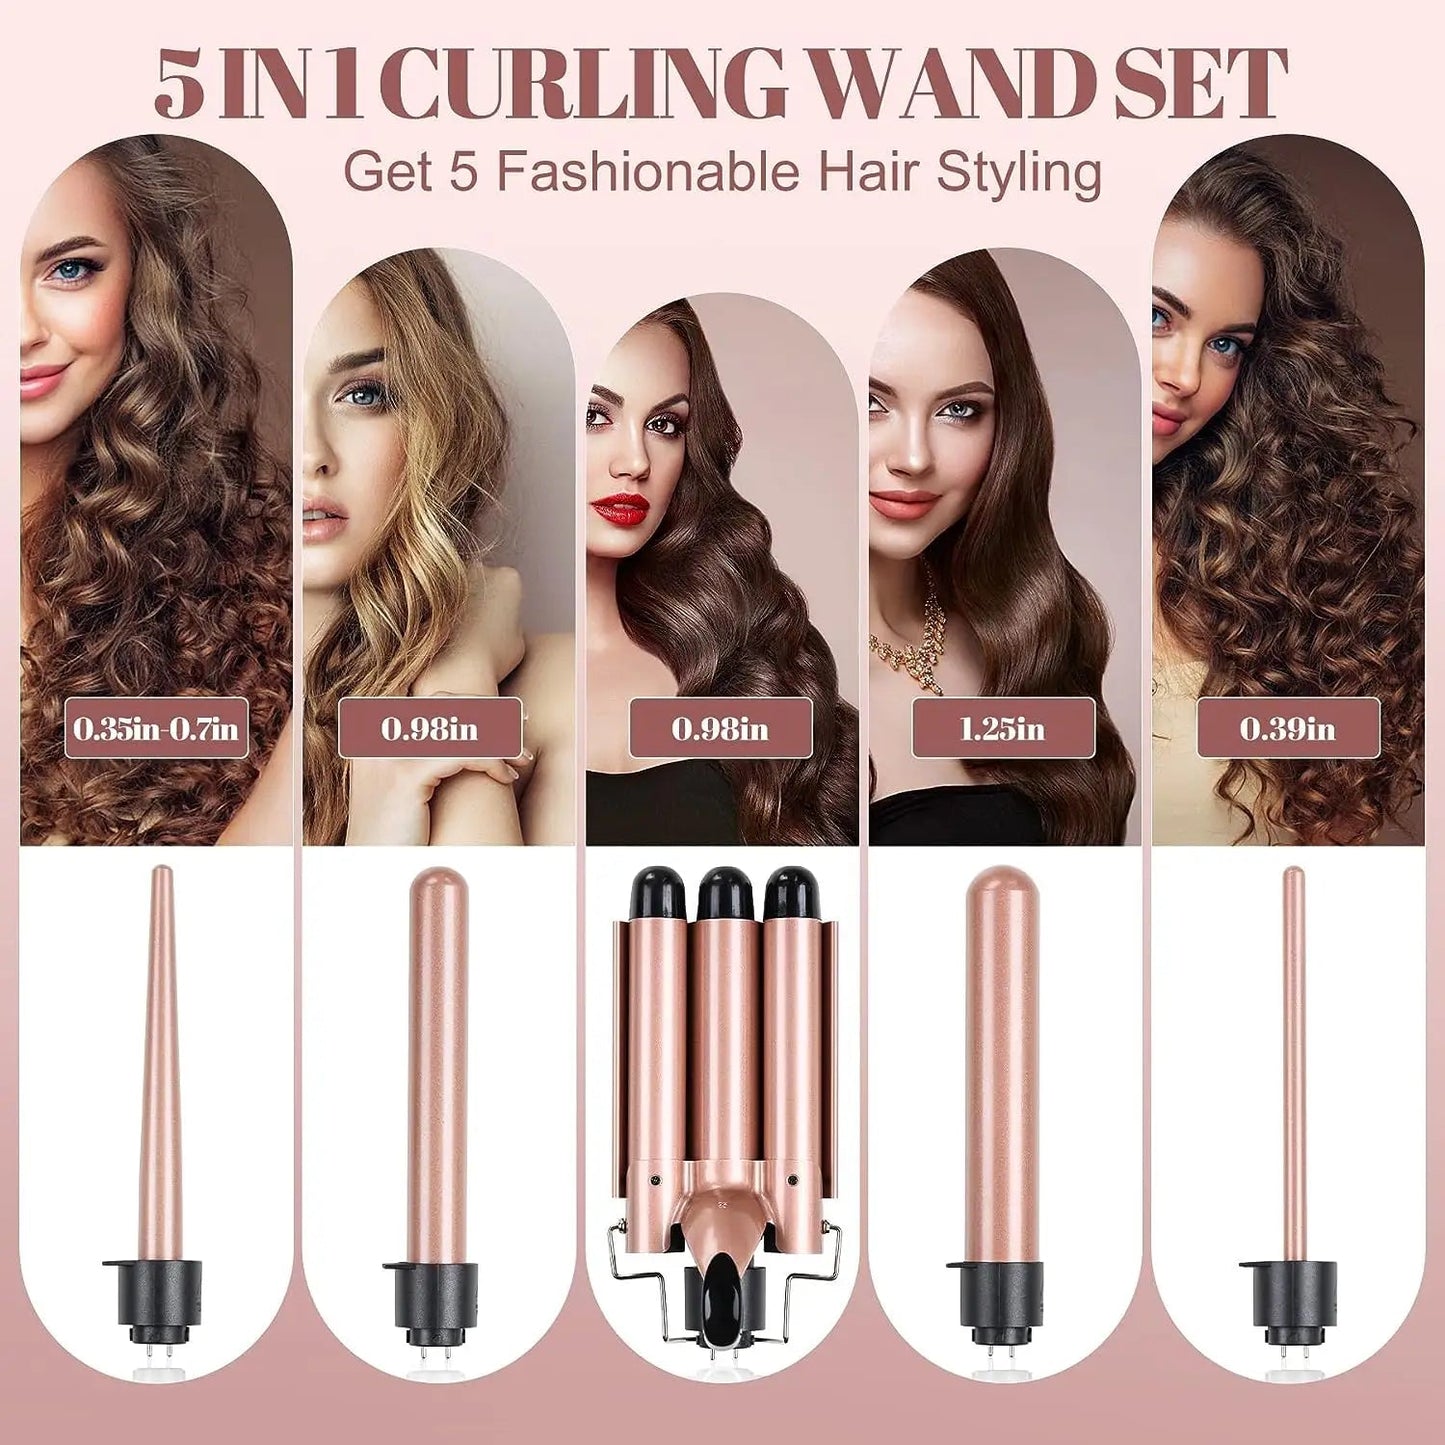 5-in-1 Curling Iron Set Curling Wand with 3 Barrel Hair Crimper Iron and Interchangeable 4 Curling Irons, Dual Voltage Hair Wave - LESSANA